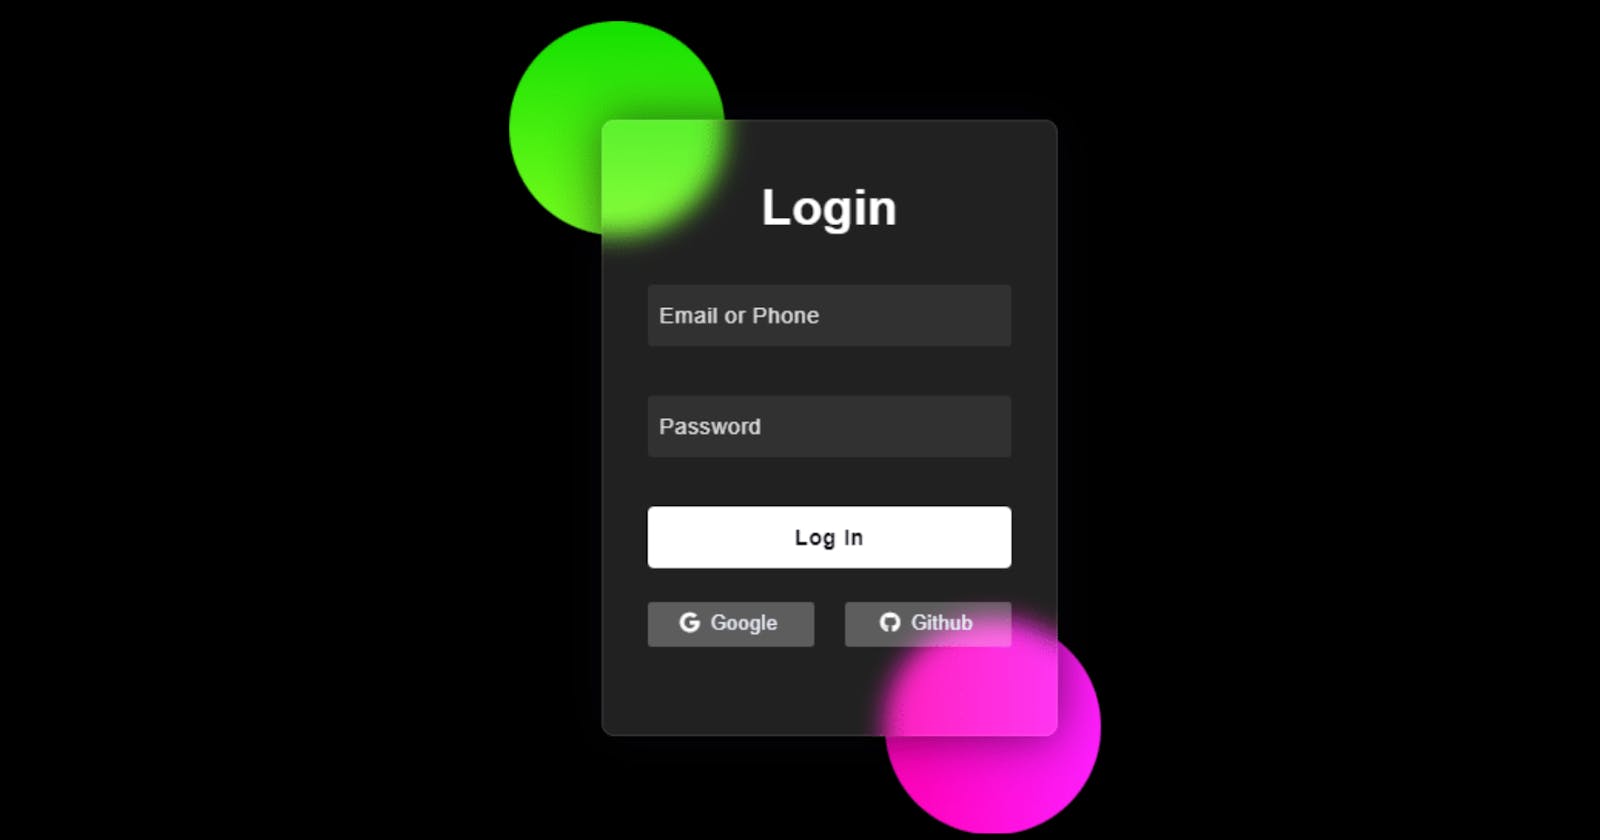 Want to create a Glassmorphism Login Form that stuns the user in 2022? Here it is